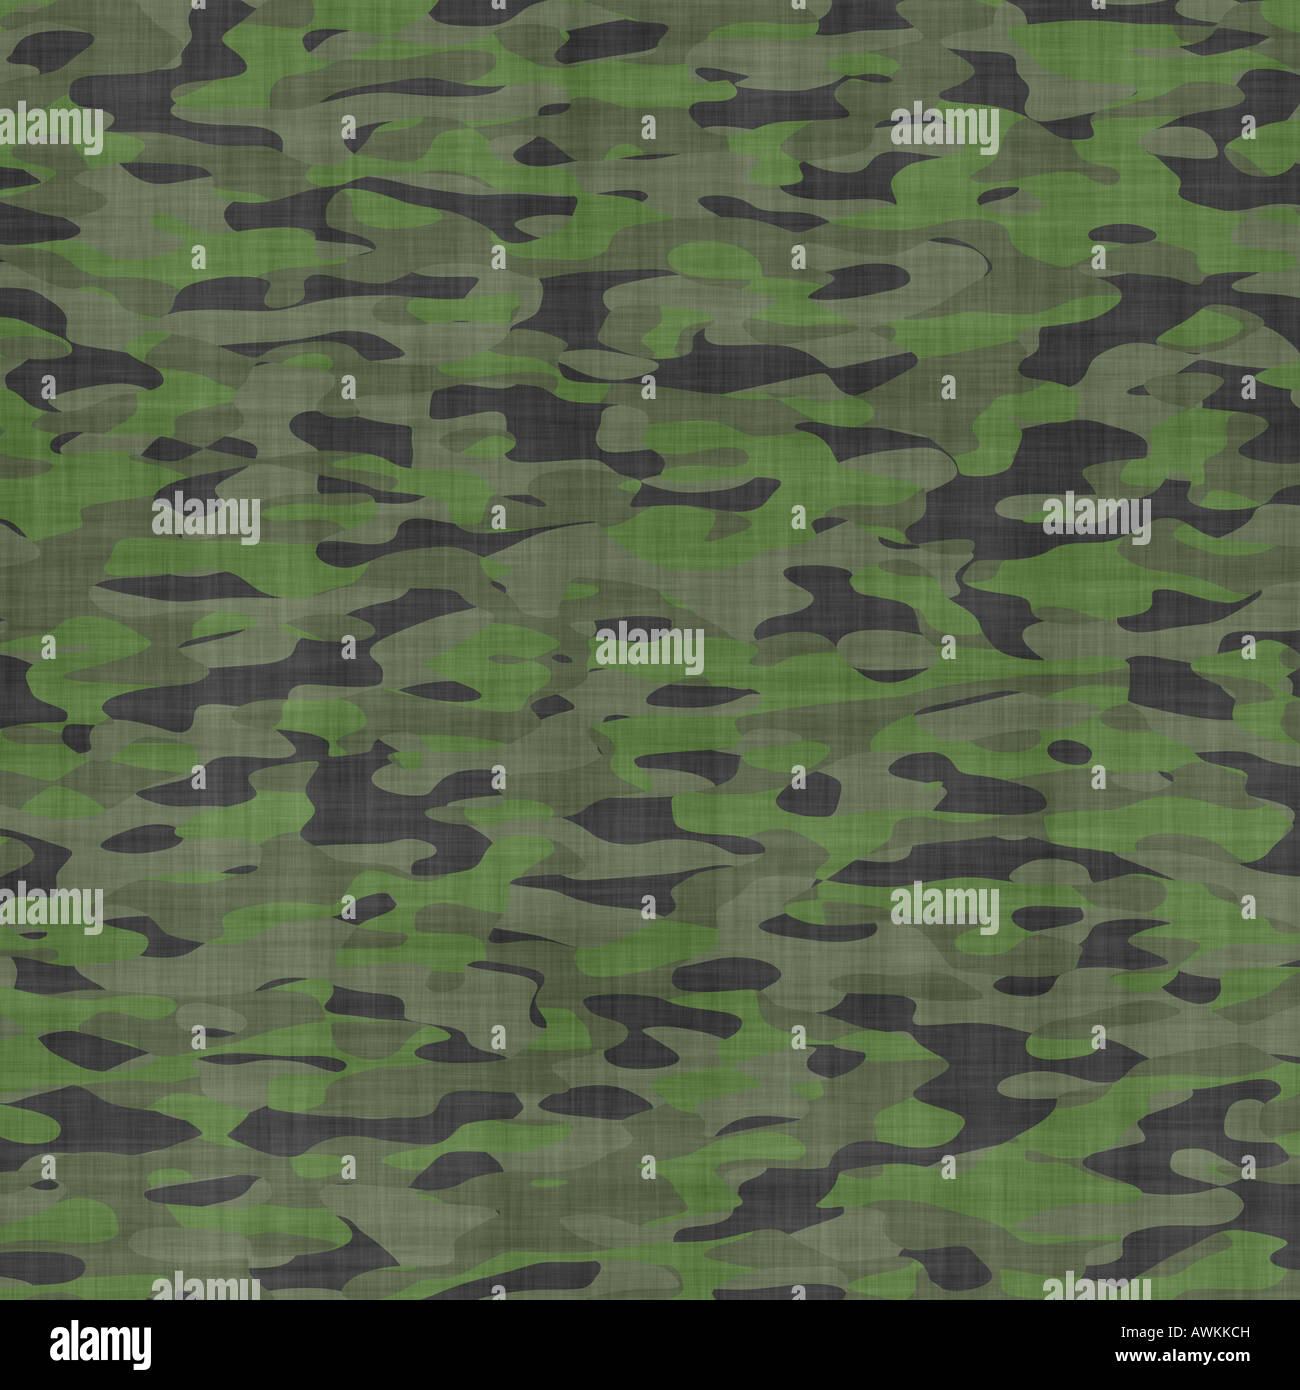 large background image of dark green jungle camouflage material Stock Photo